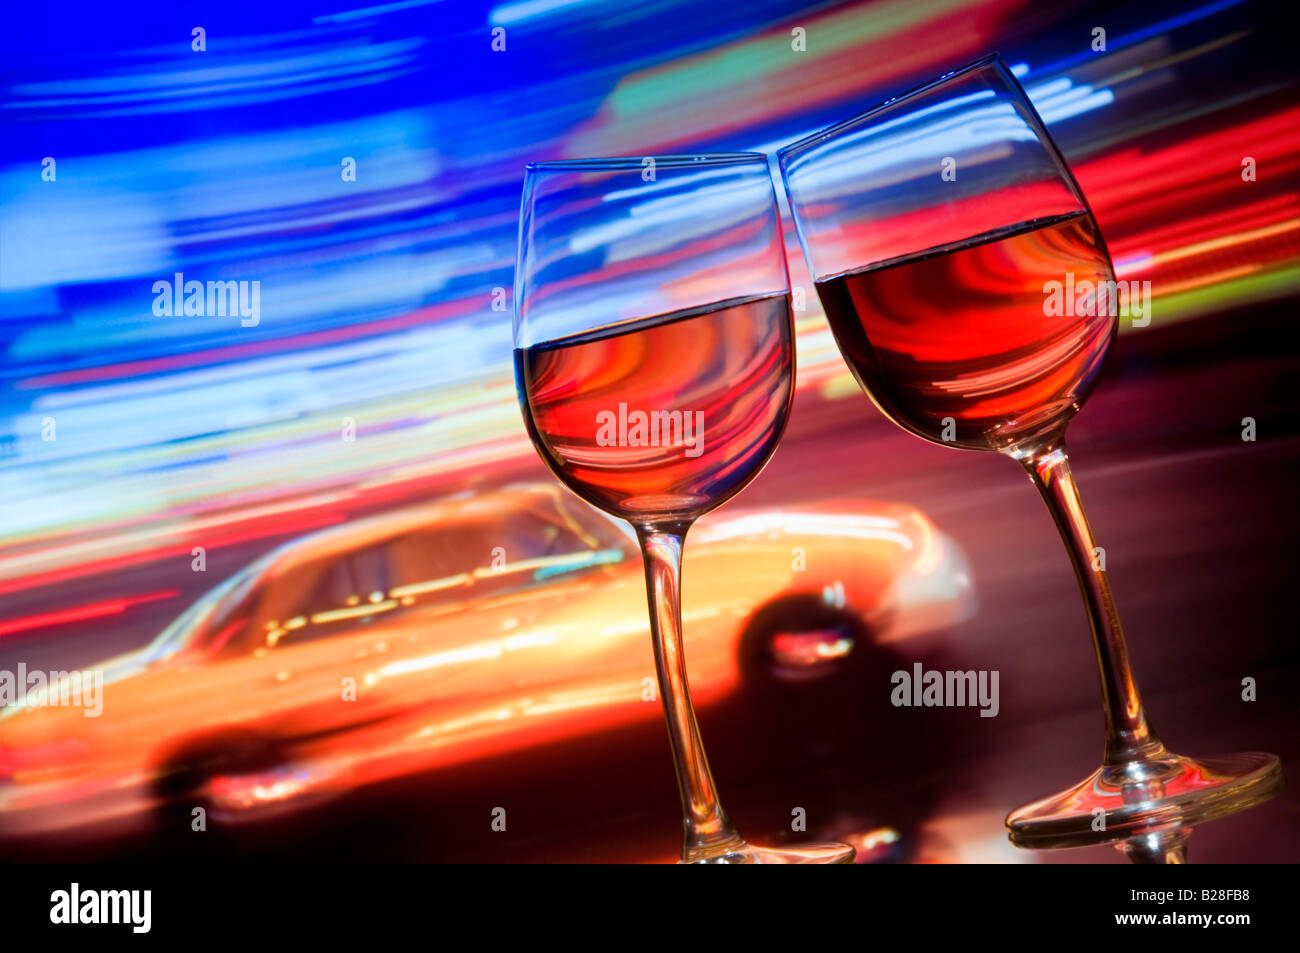 Two wine glasses lean together with blurred yellow taxi cab and streaks of neon lighting behind. Times Square New York City USA Stock Photo